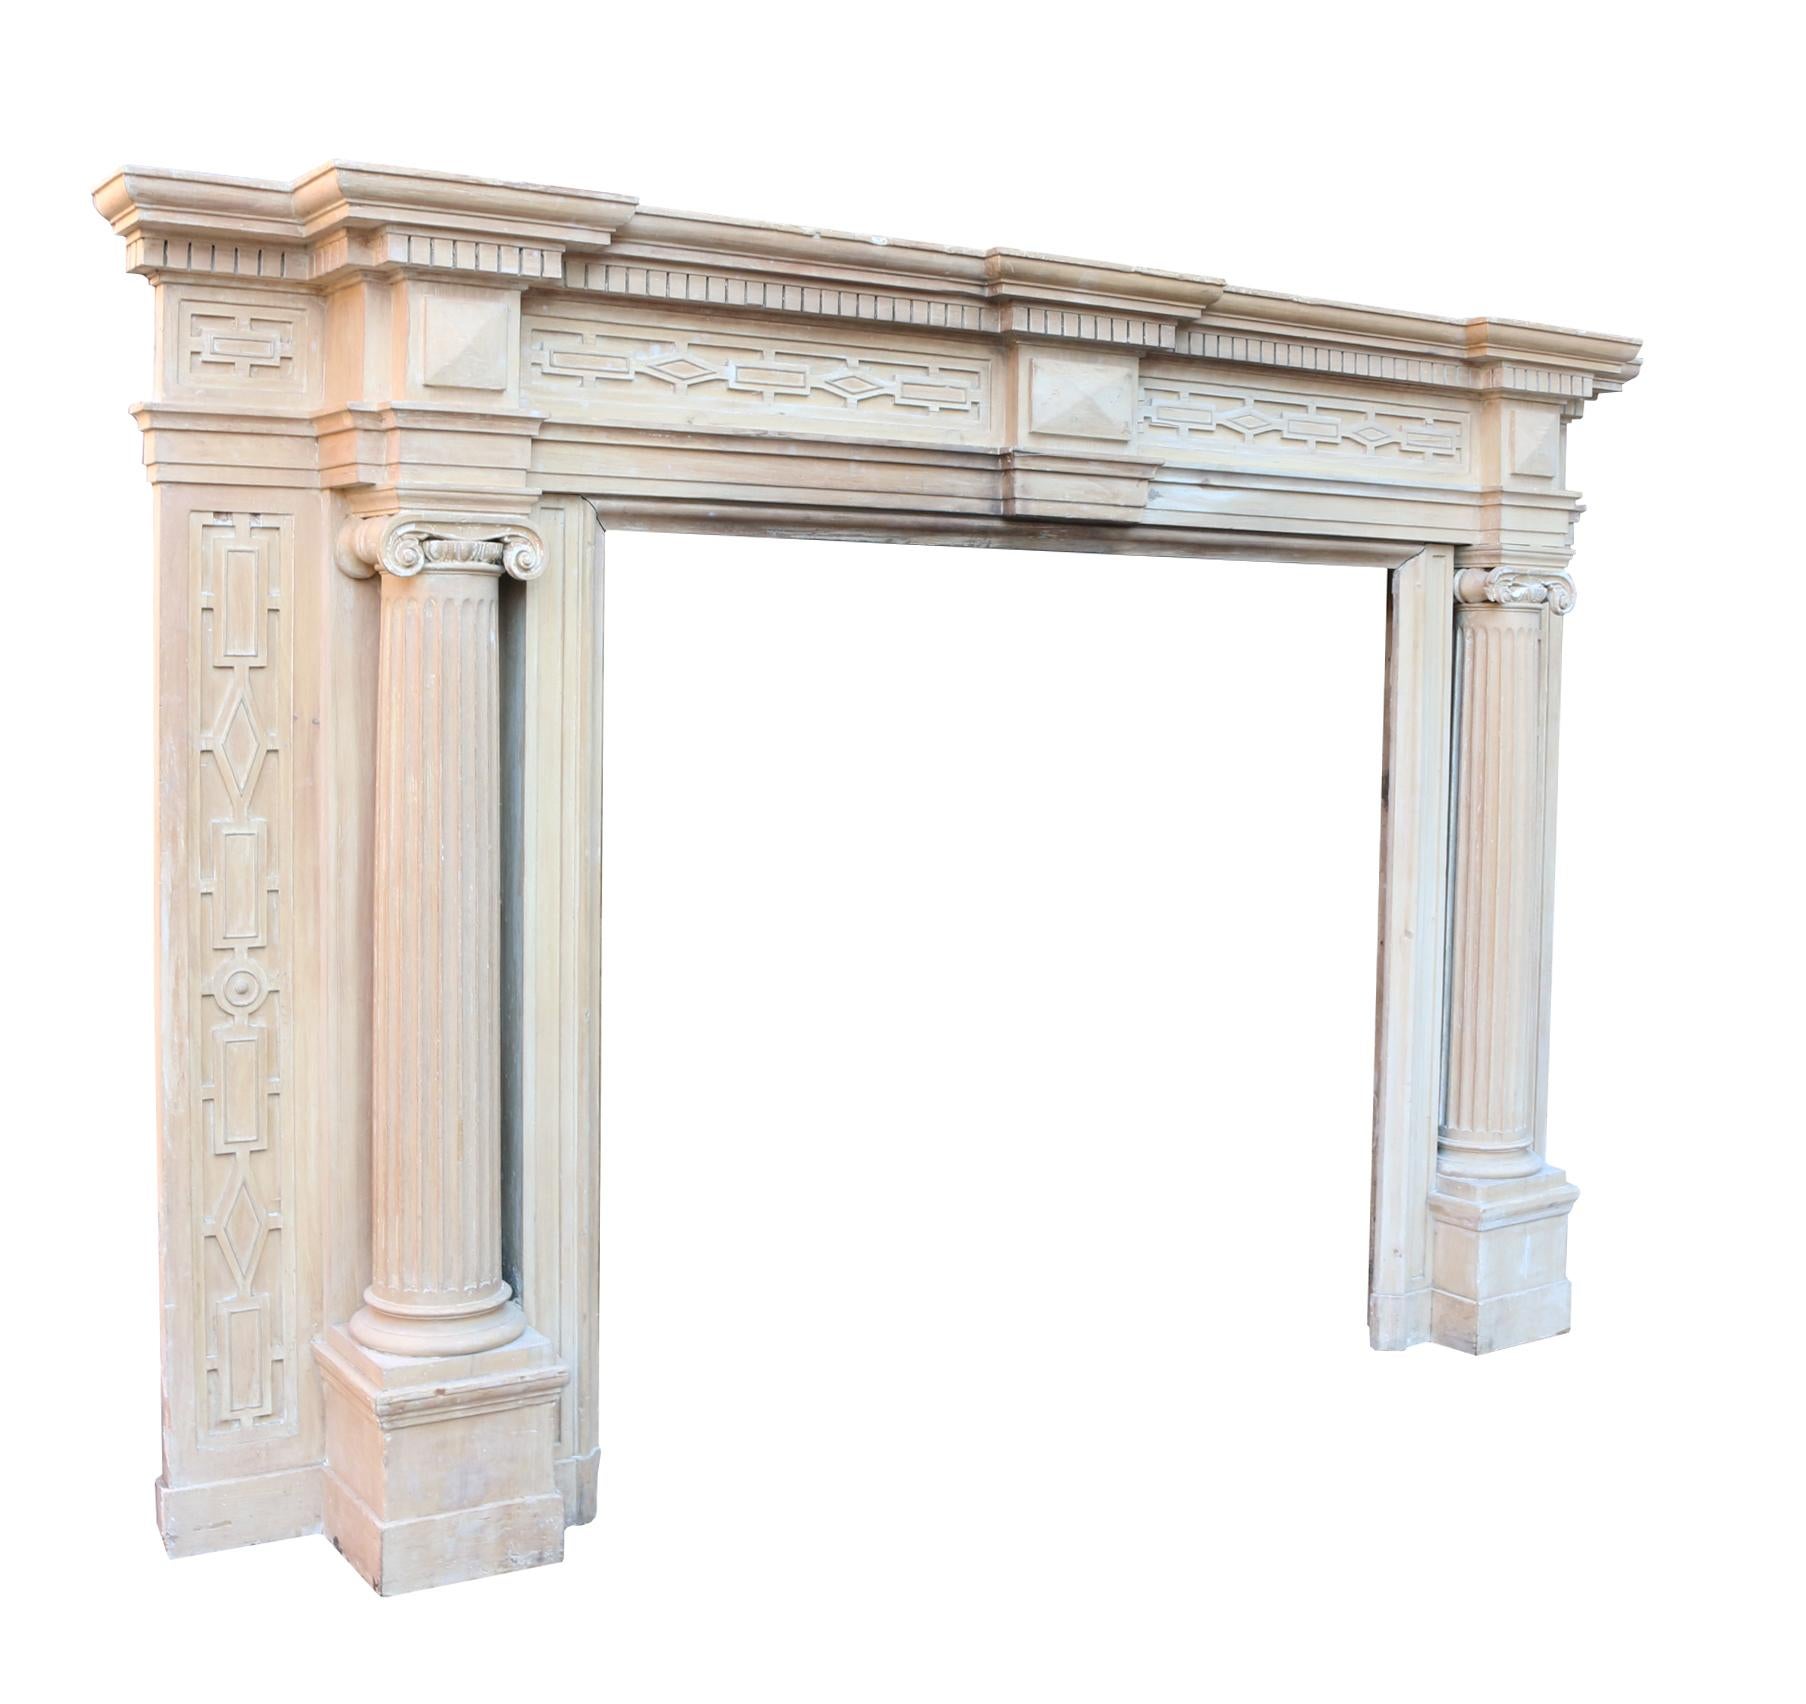 This fire surround is in good original condition with only minor wear and small losses.
Opening Height 106.5 cm
Opening Width 116 cm
Width Between Legs 210 cm
Weight 50 kg.